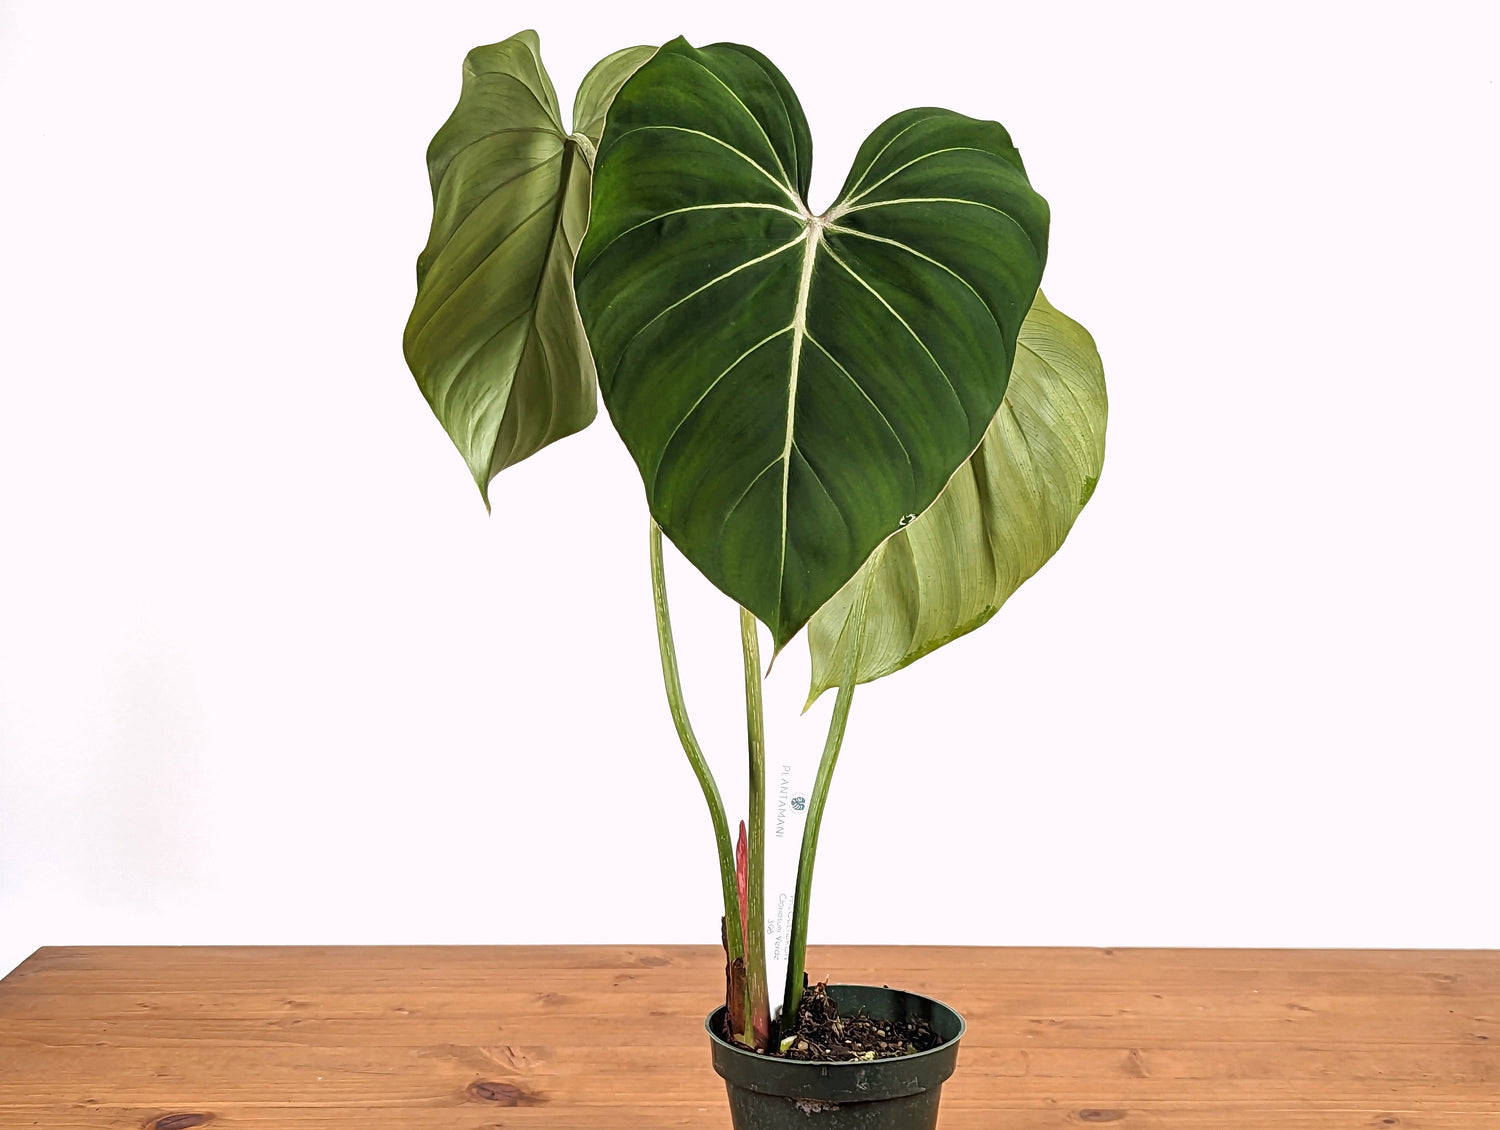 Philodendron Gloriosum Verde - 4 inch pot Live Tropical Houseplant Grows in a Crawling Terrestrial Manner Great for Window Boxes